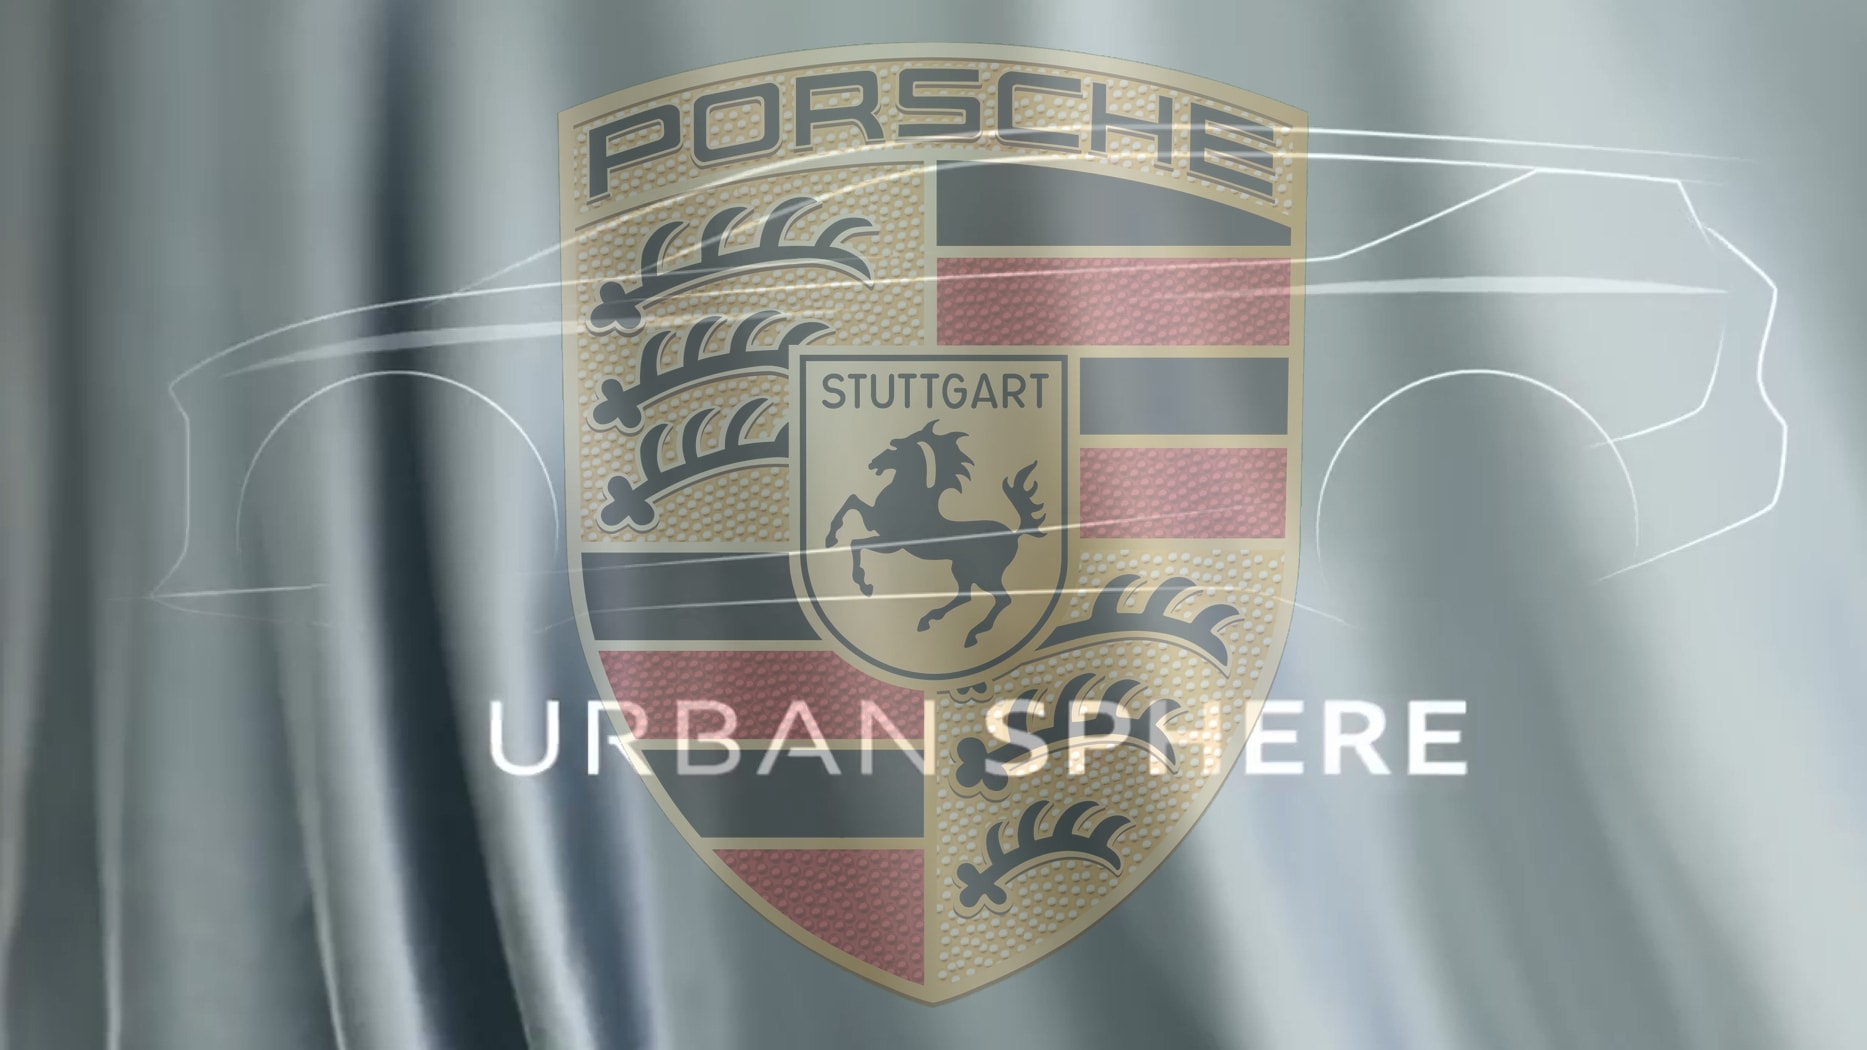 photo of After the Cayenne Saved It, Porsche Plans an Electrified Flagship SUV image